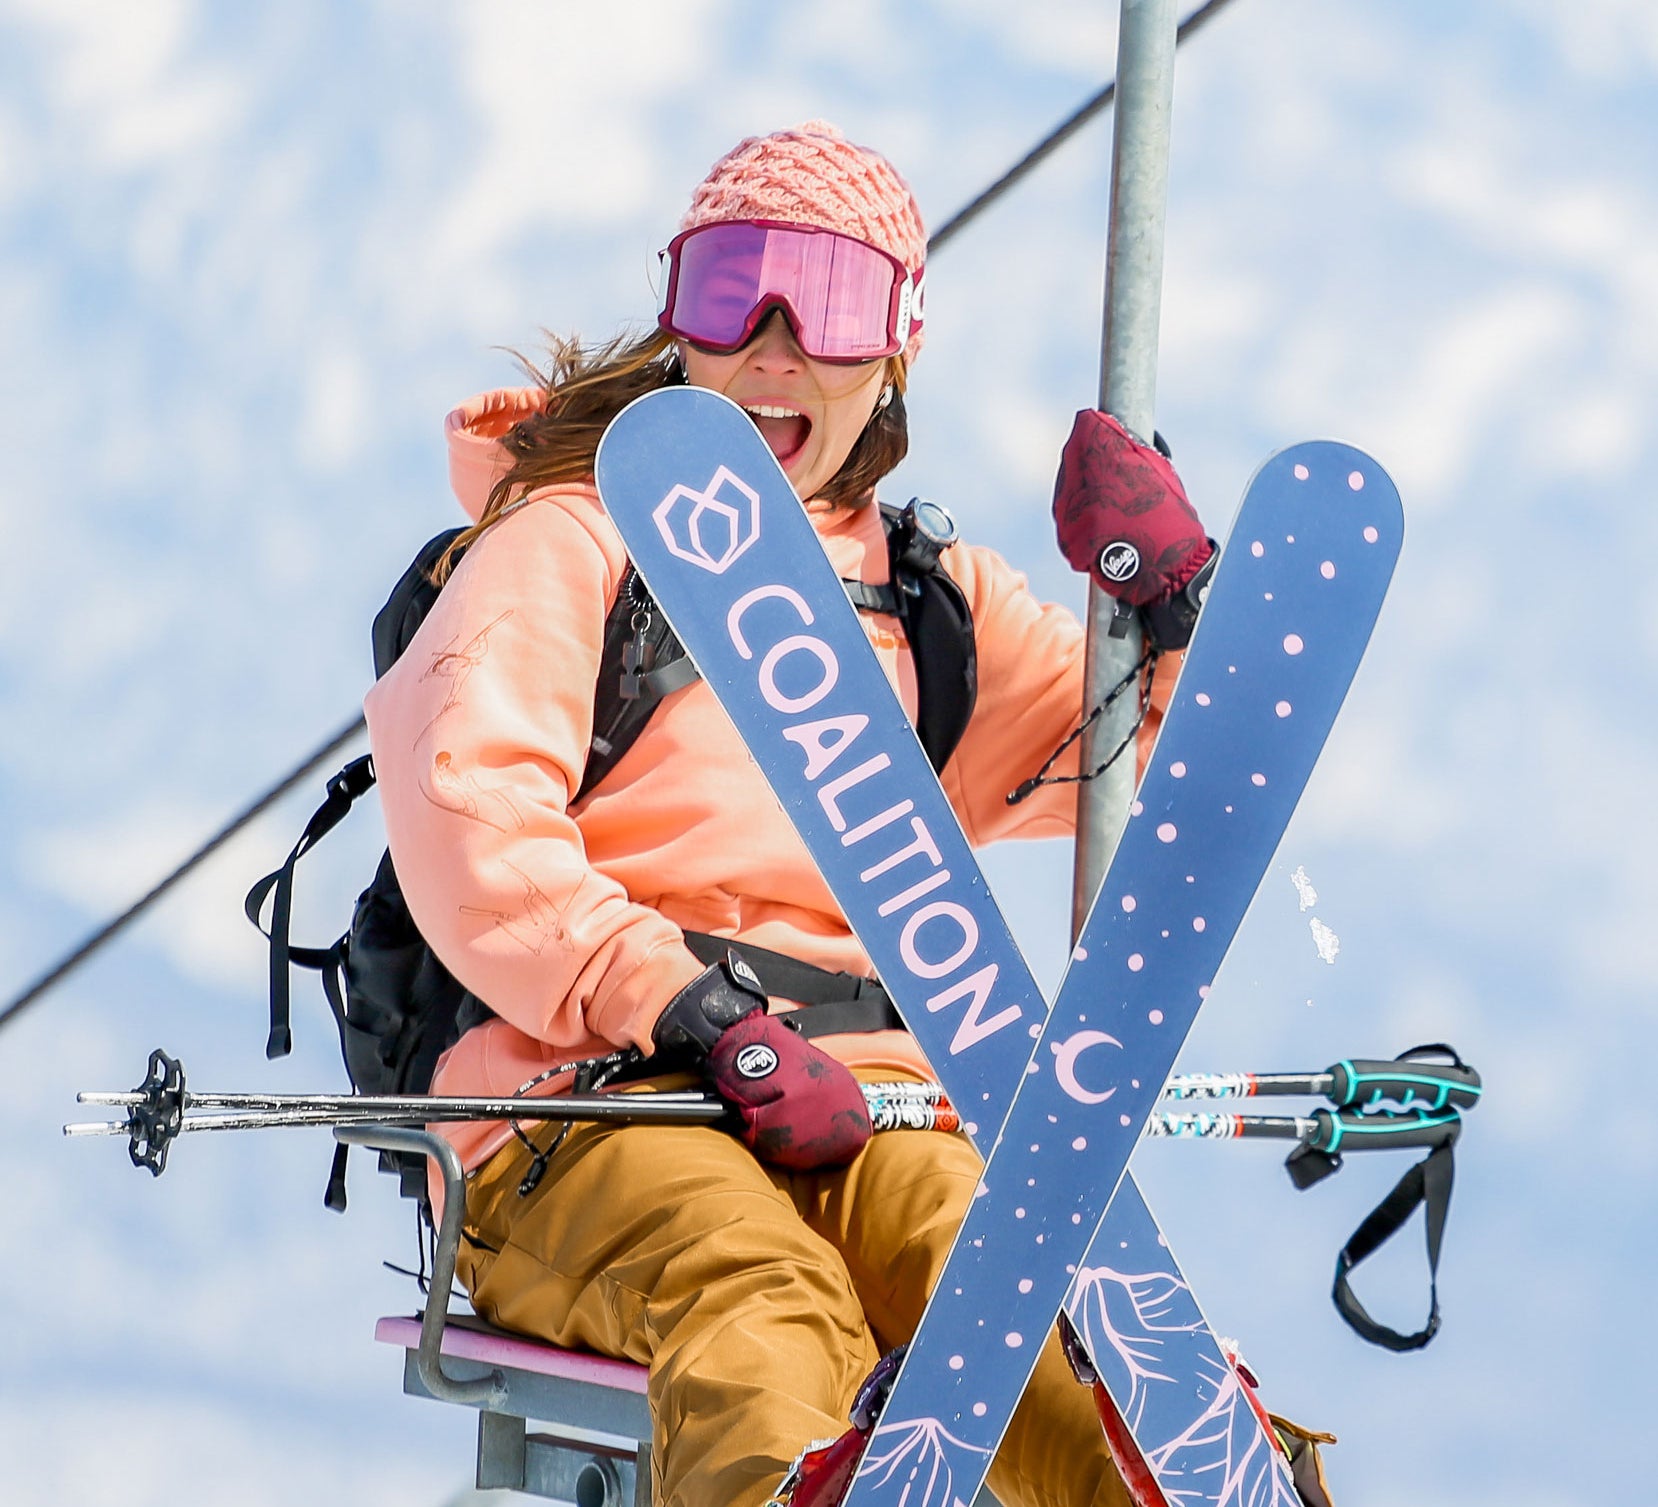 Find the Sweet Spot: Where To Mount Your Ski Bindings